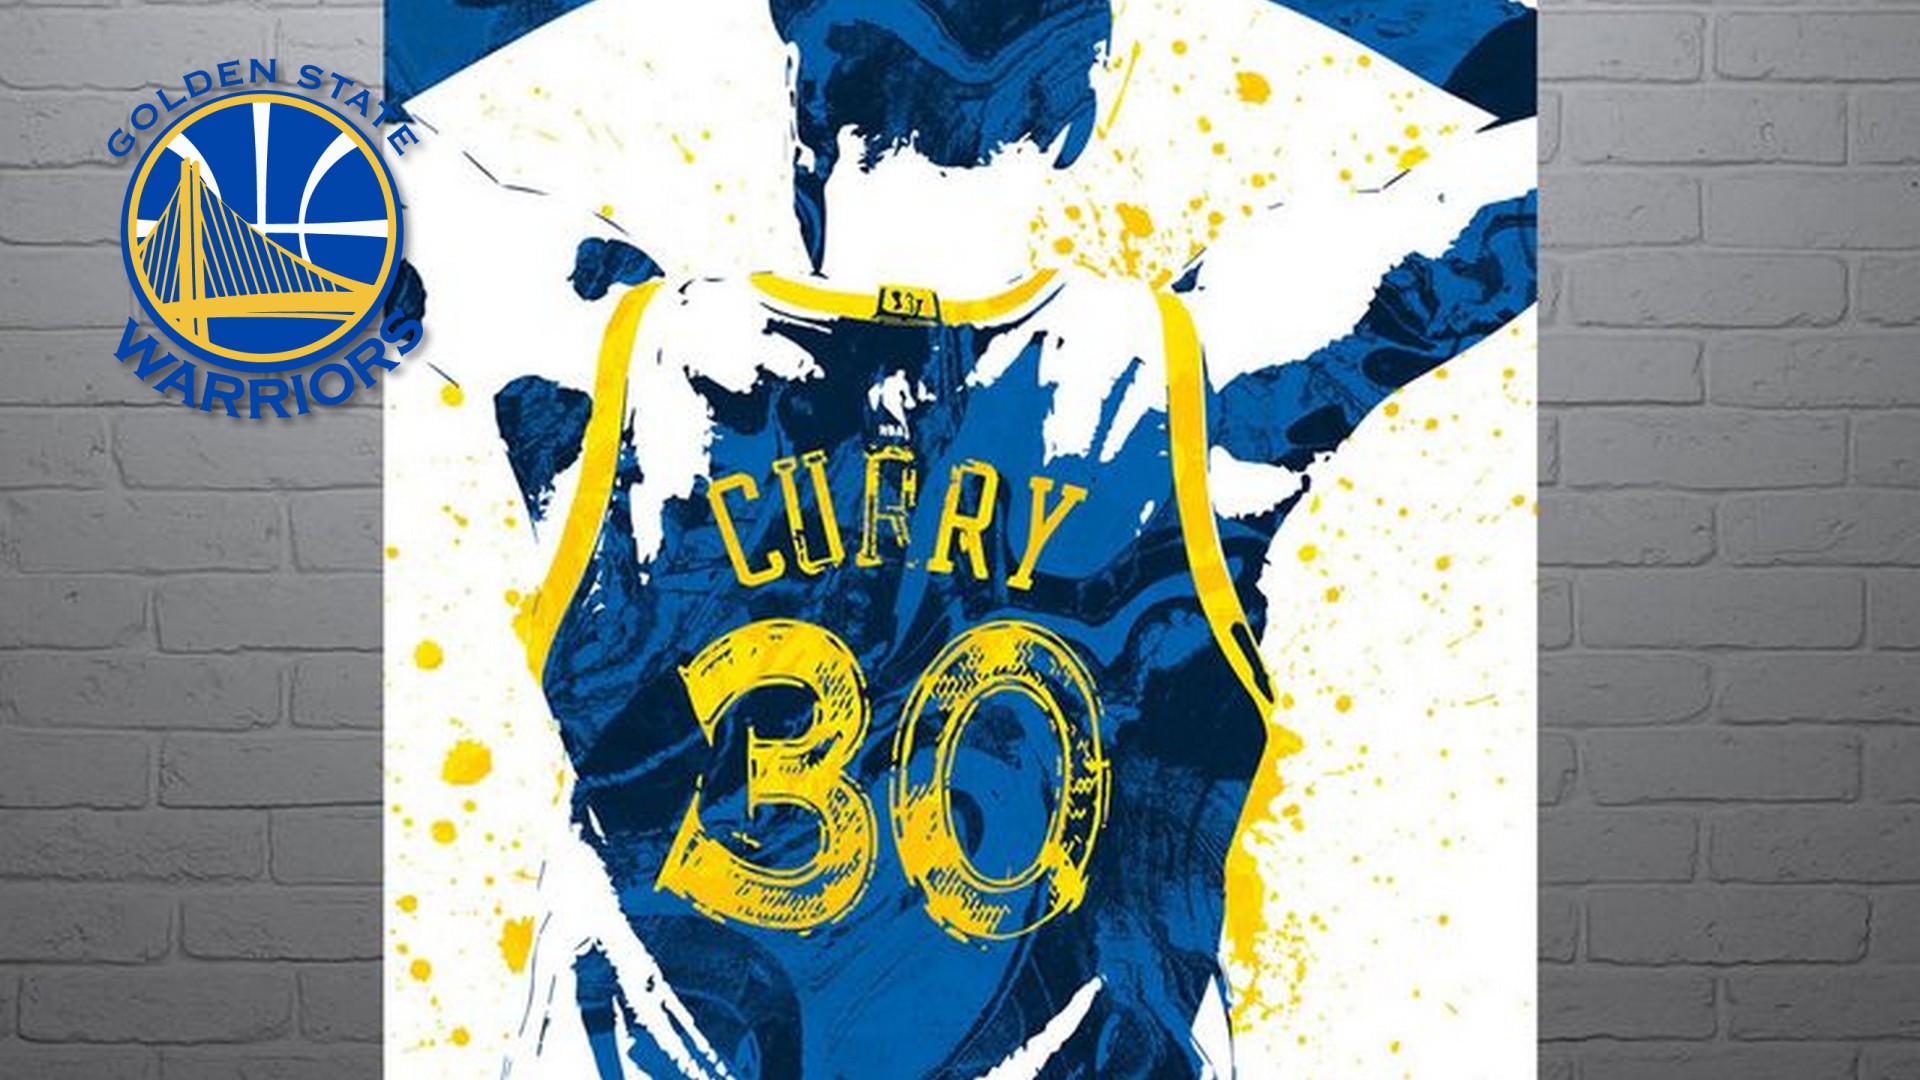 Stephen Curry Wallpaper For Mac Backgrounds with image dimensions 1920x1080 pixel. You can make this wallpaper for your Desktop Computer Backgrounds, Windows or Mac Screensavers, iPhone Lock screen, Tablet or Android and another Mobile Phone device